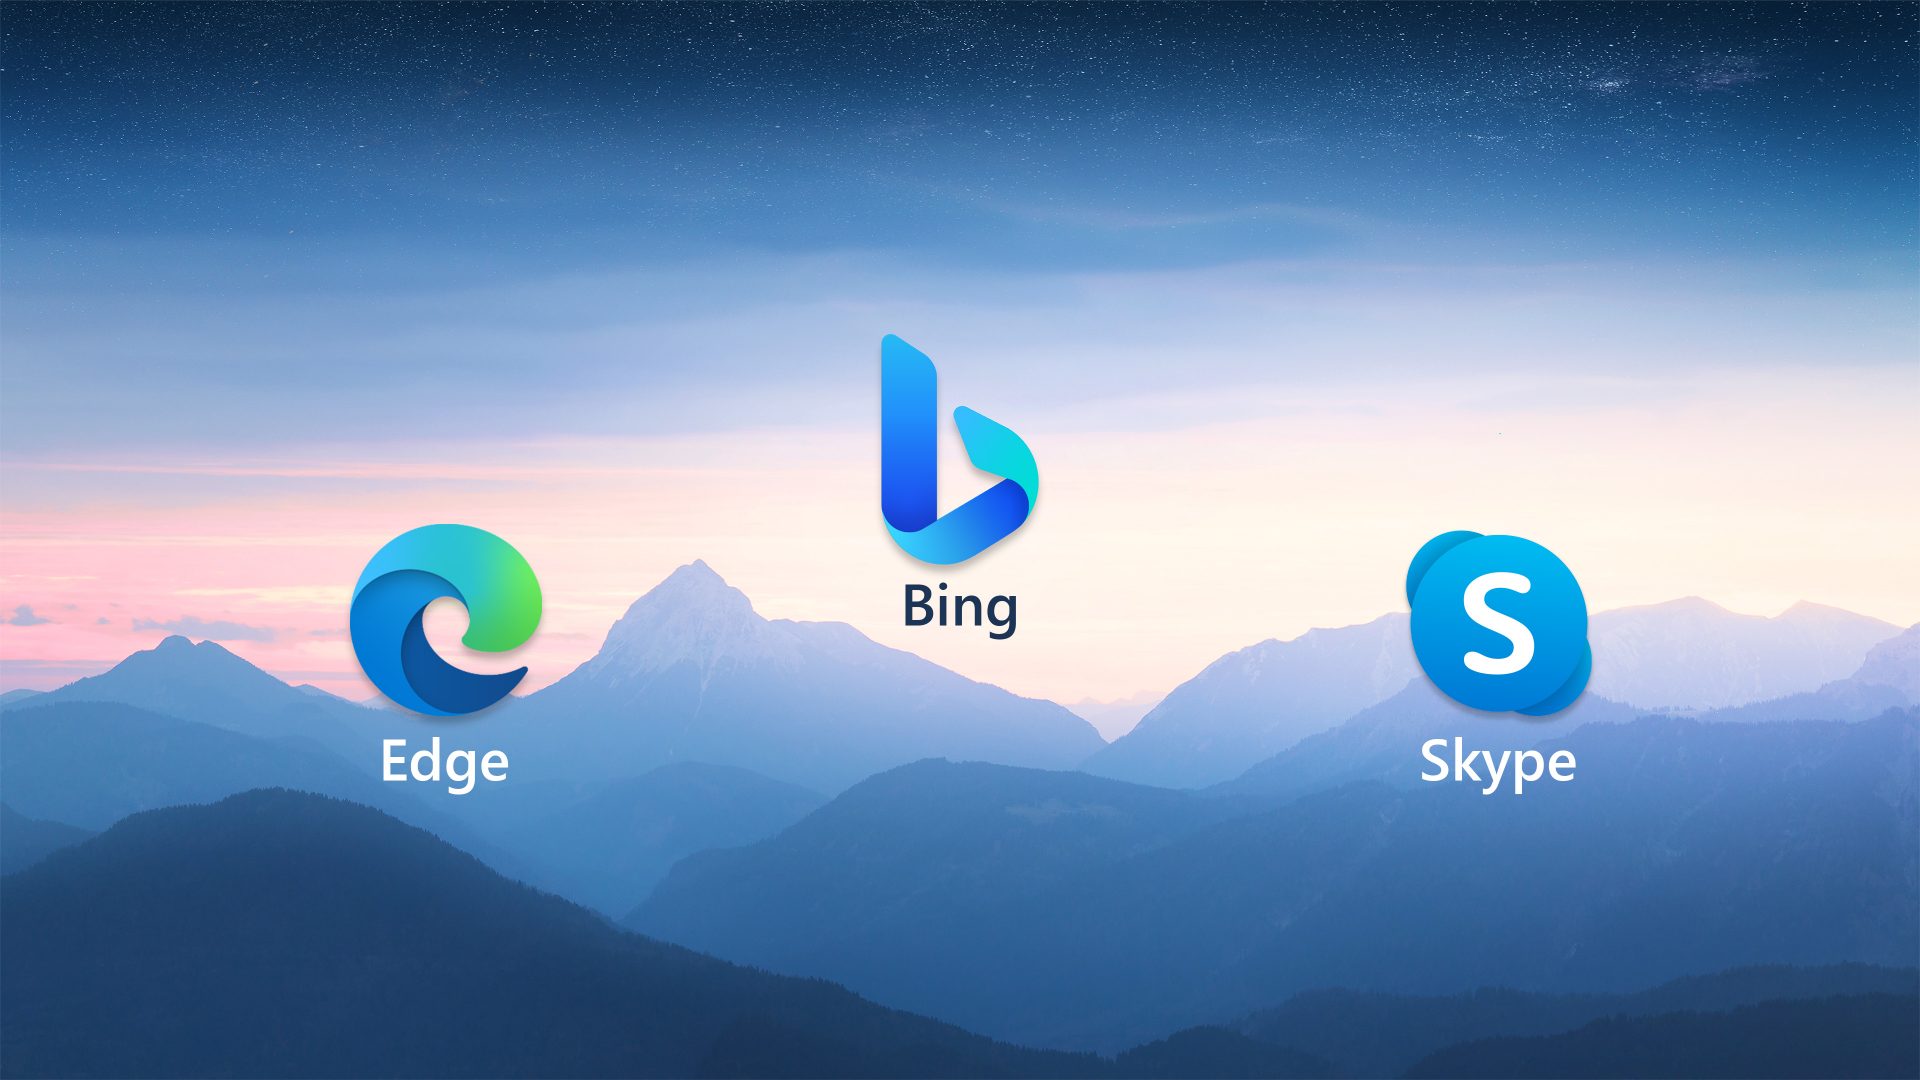 Icons for Edge, Bing and Skype on top a mountainous background